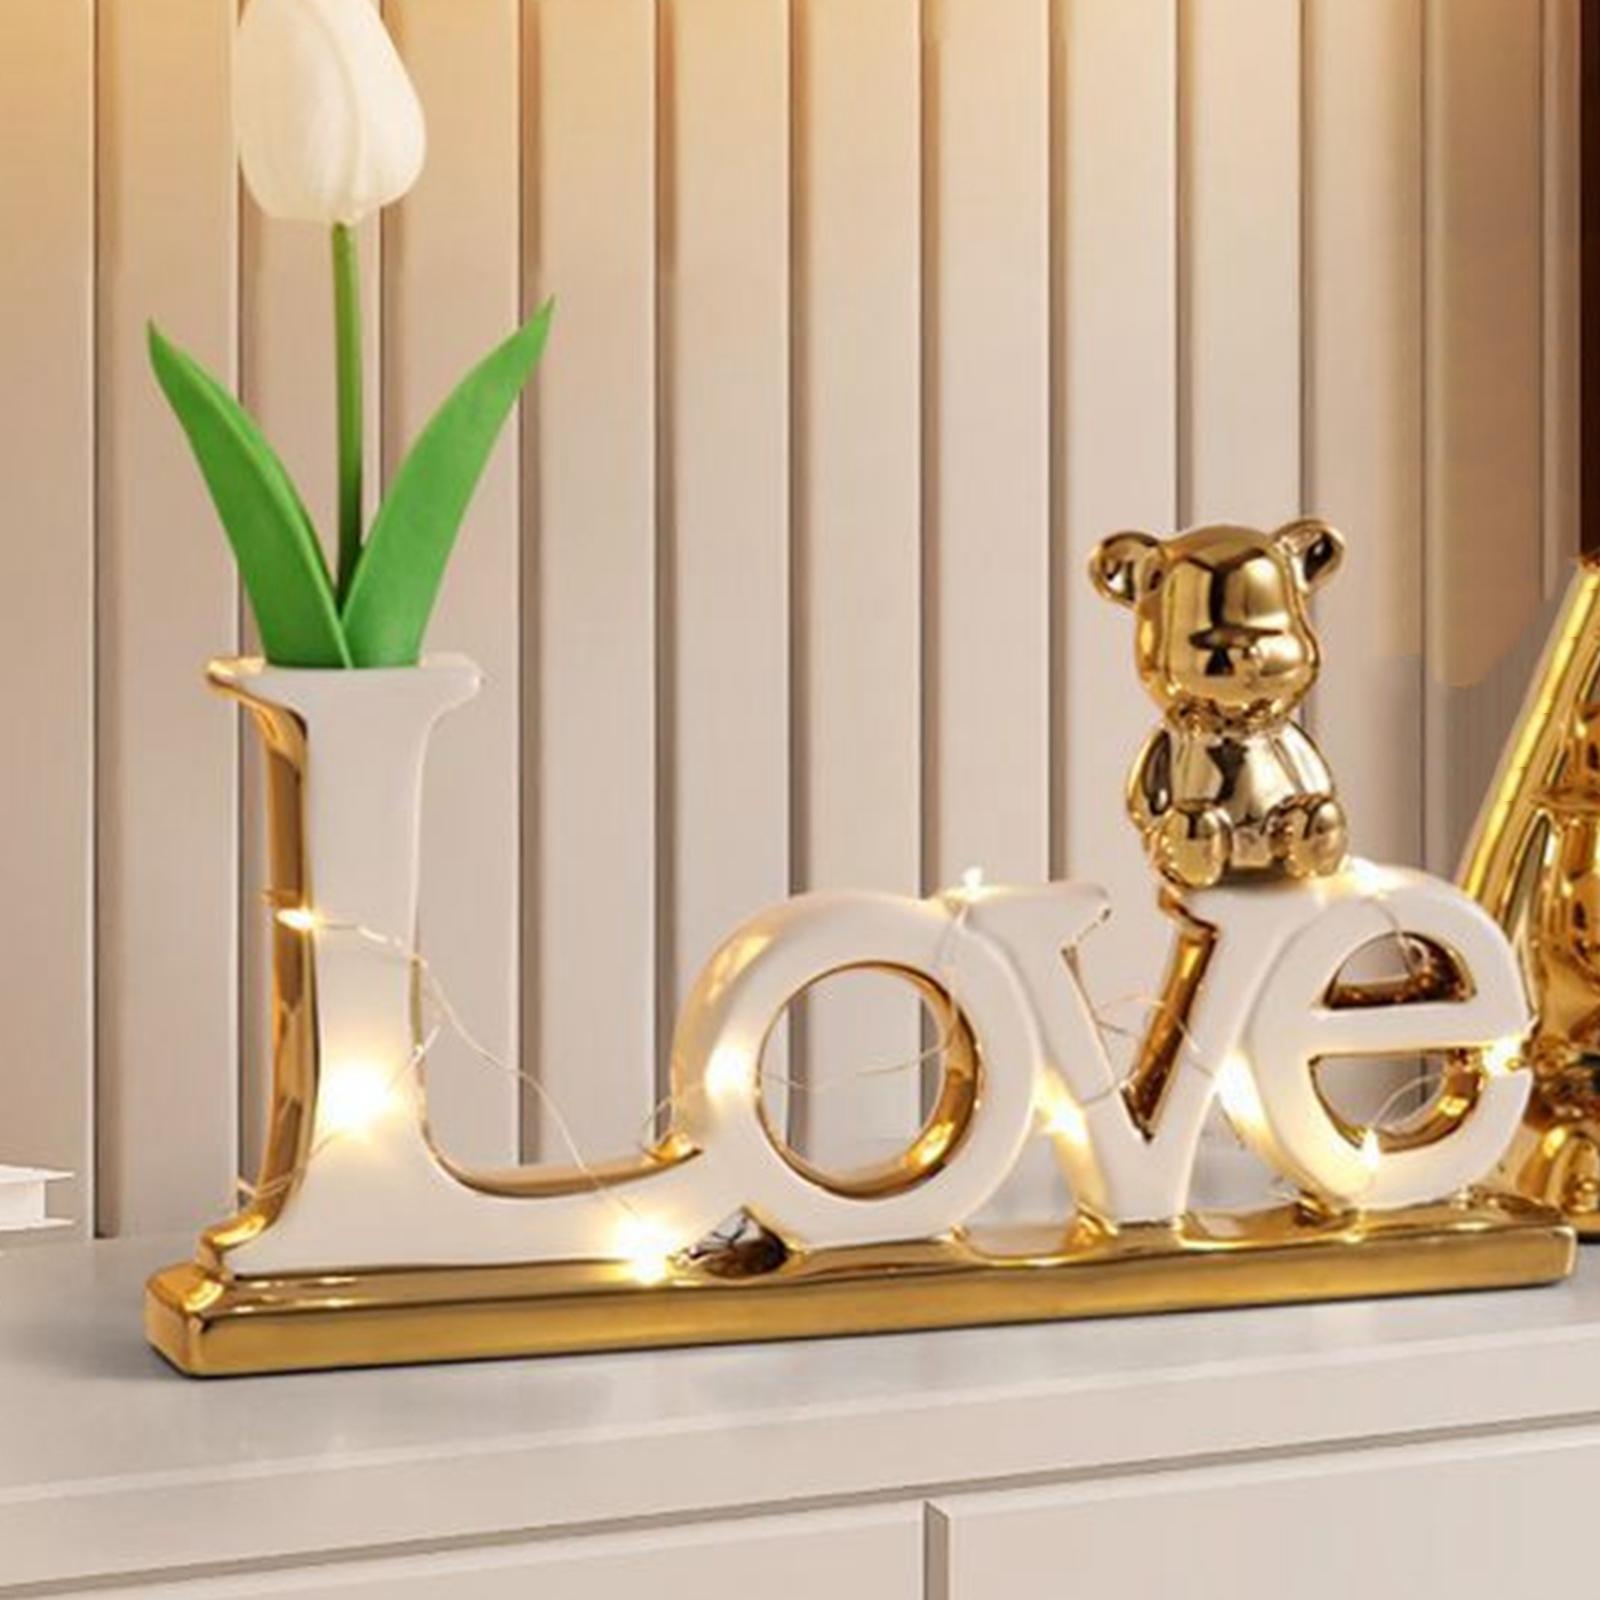 Word Signs for Home Decor Ceramic Block Letters Sign for Shelf Bedroom Table